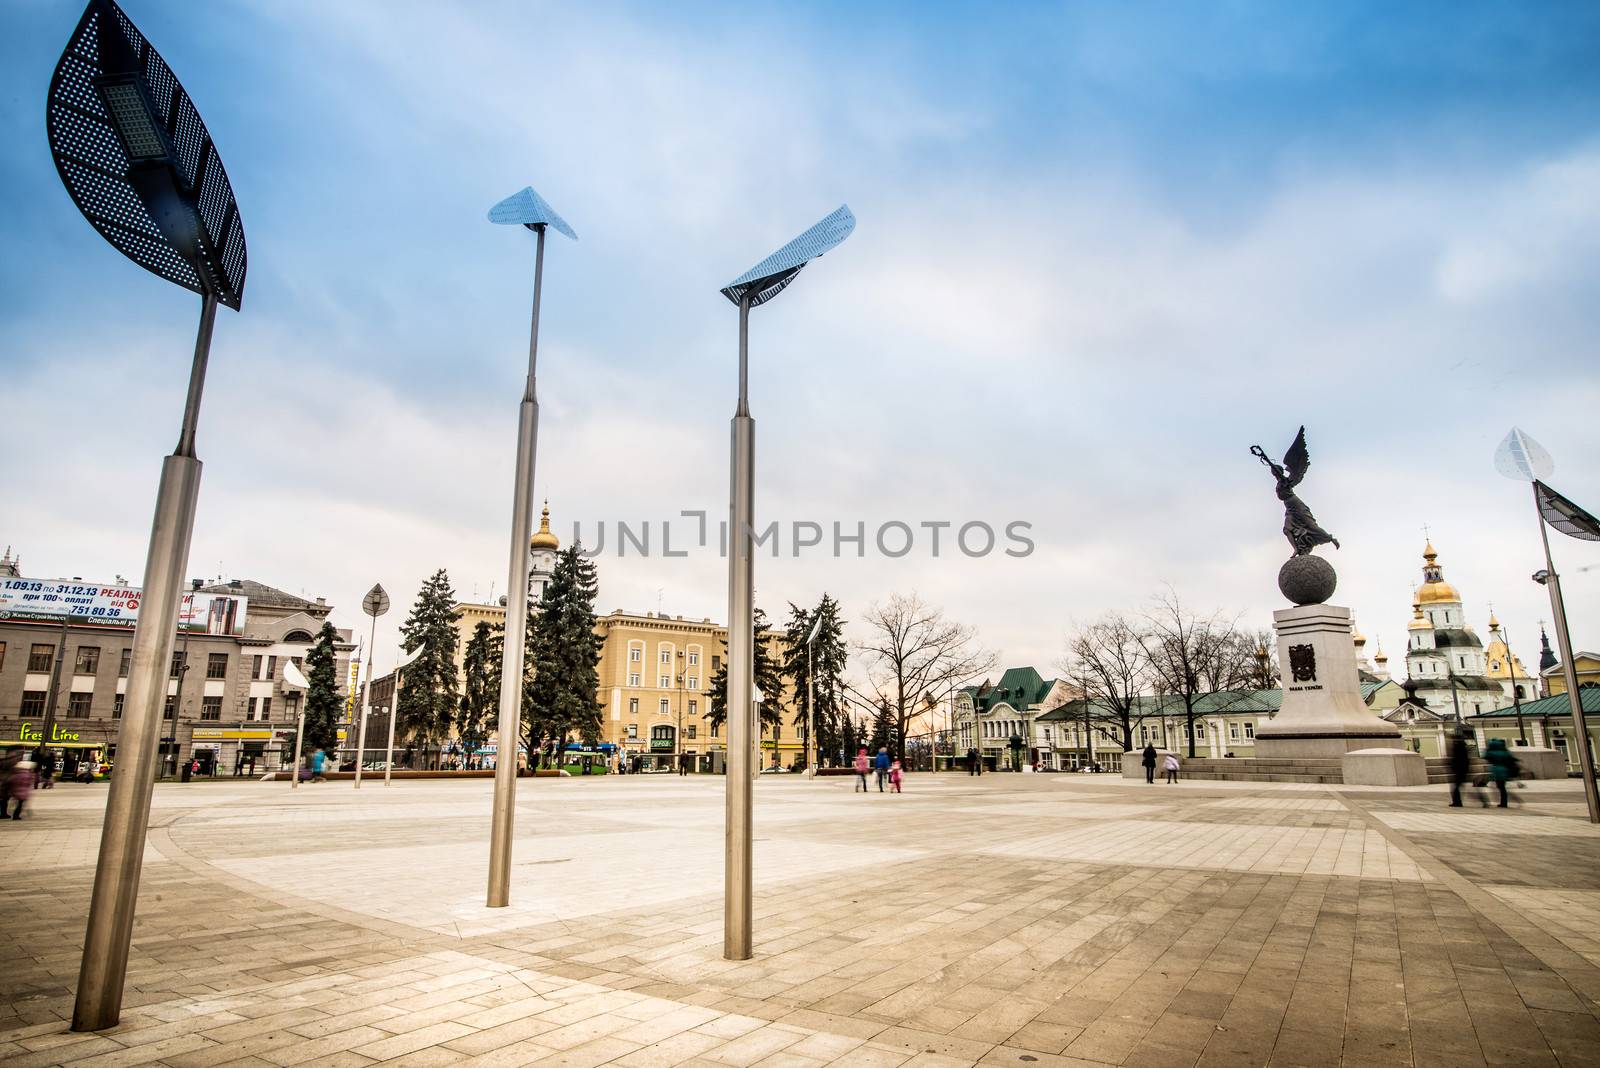 KHARKIV, UKRAINE - DECEMBER 01: Constitution Square in the city center after a recent overhaul on December 01, 2013 in Kharkiv, Ukraine.